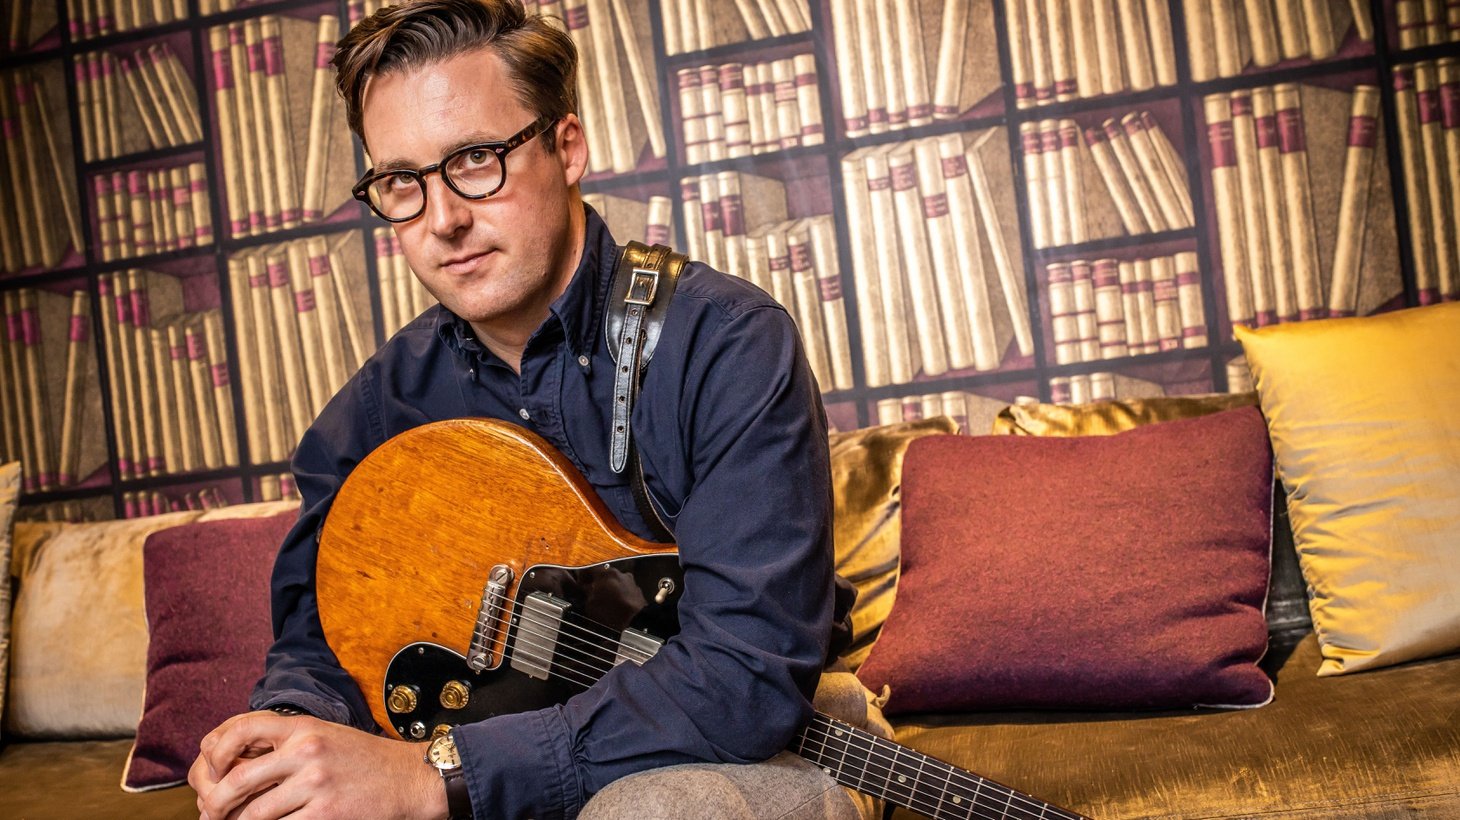 Nick Waterhouse - American songwriter, vocalist, and guitarist